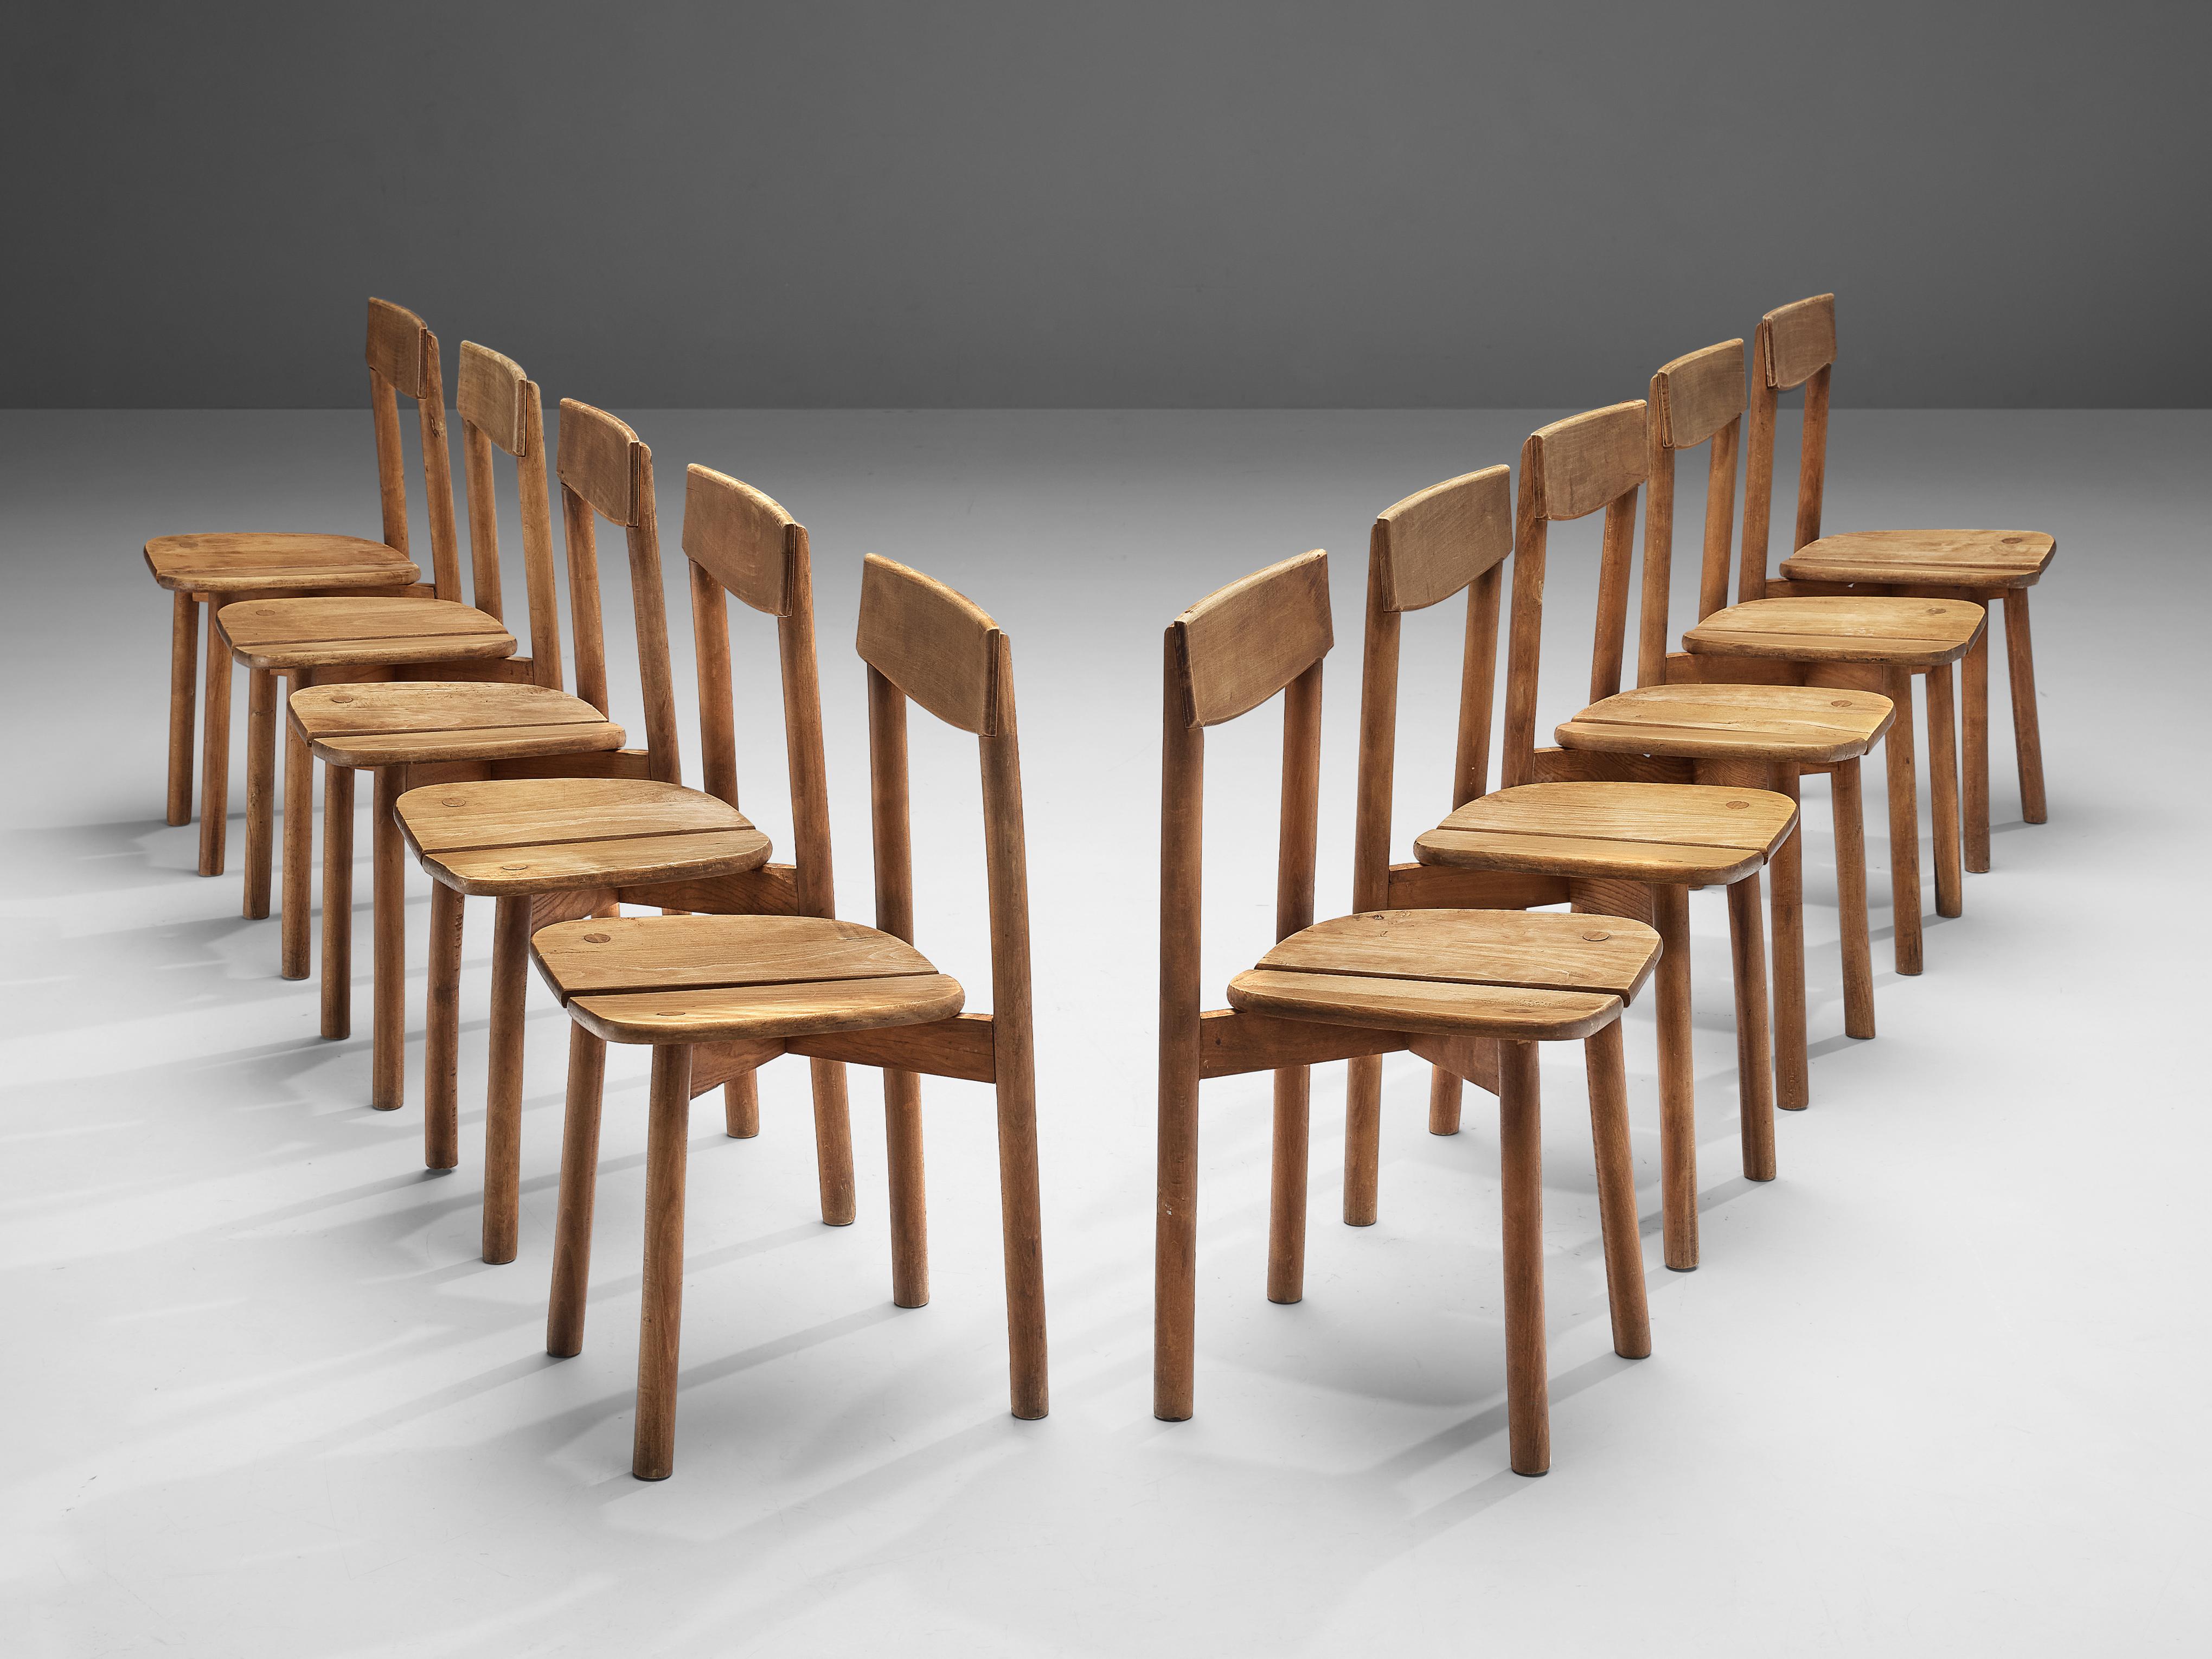 Pierre Gautier-Delaye, set of ten dining chairs, beech, France, 1960s

This set of subtle and modest dining chairs are executed in stained beechwood. The seating area is divided into two organically shaped slats and is detailed with wood-joints on